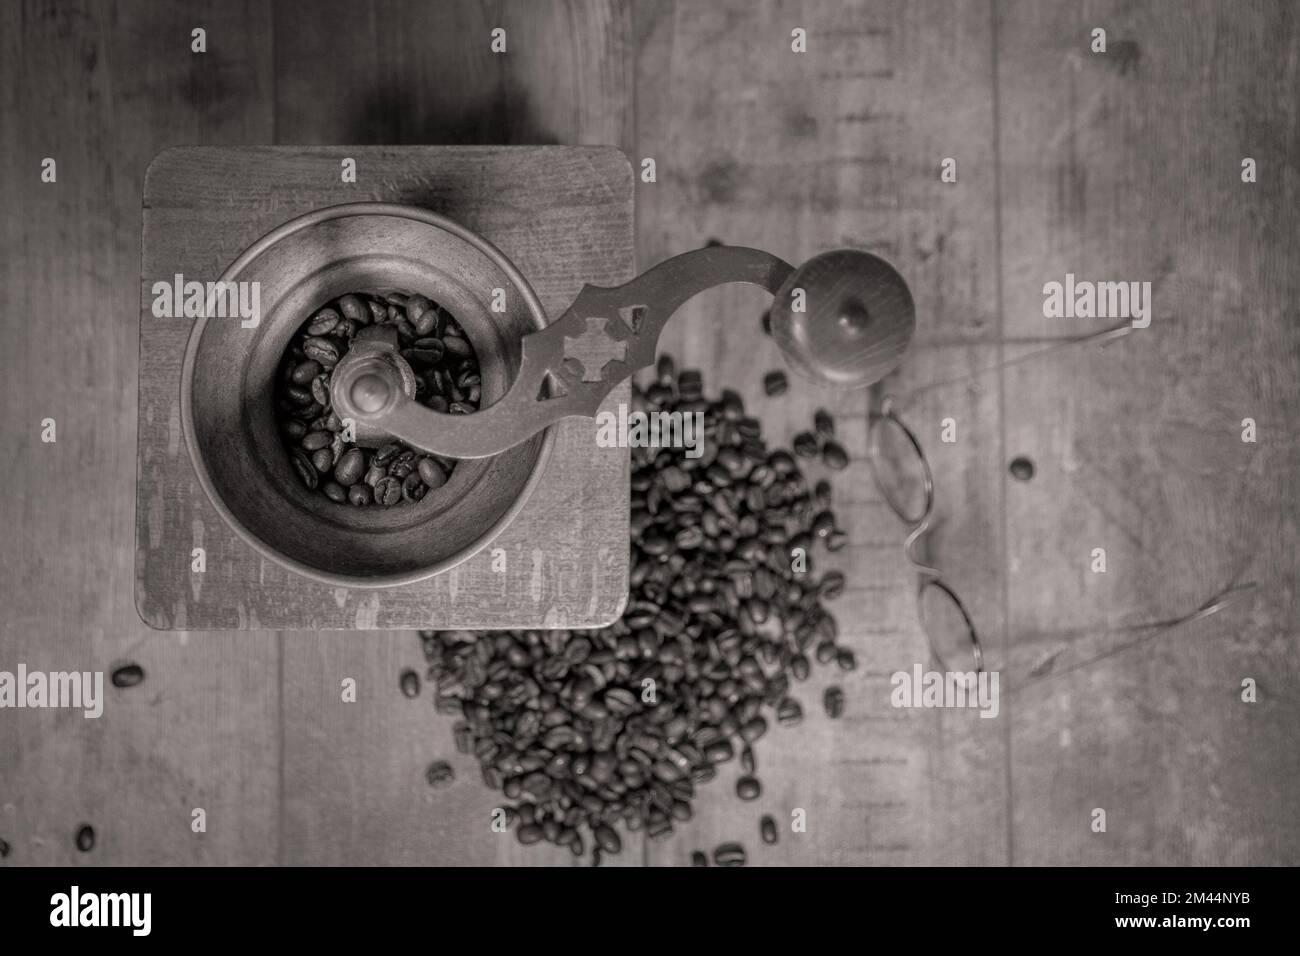 Old manual coffee grinder. Coffee beans scattered on a textured table and old glasses for composition Stock Photo